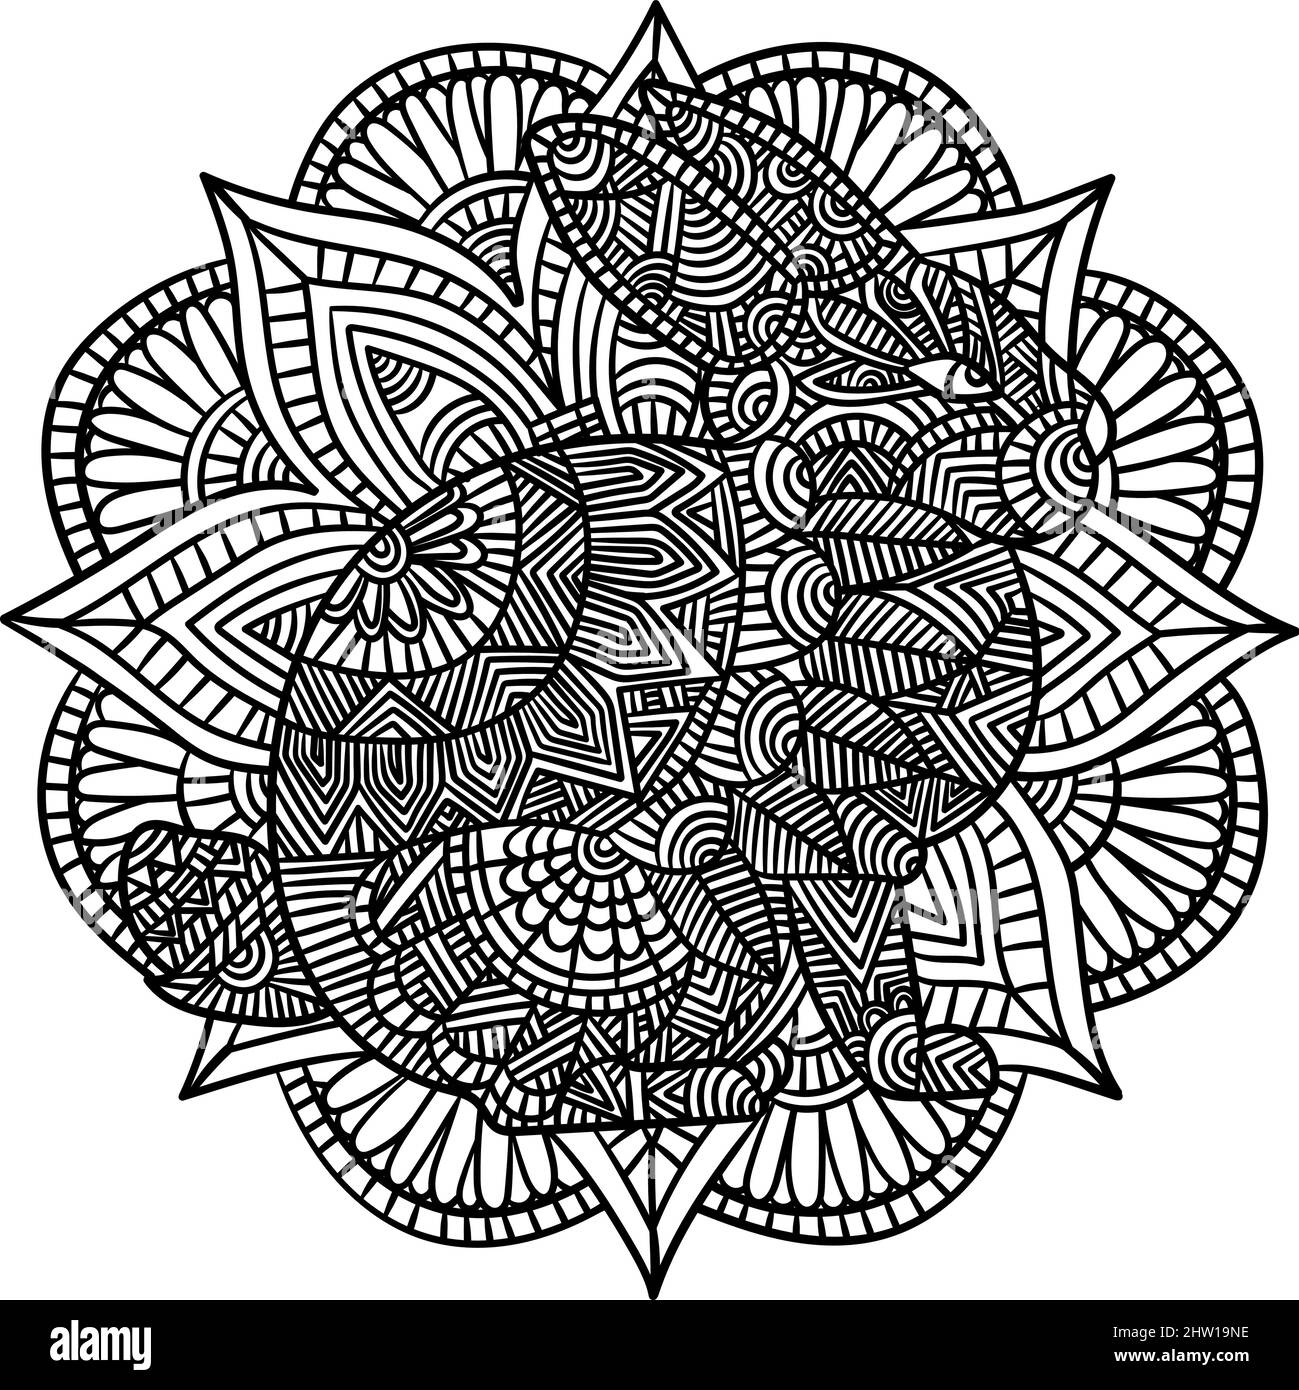 Rabbit Mandala Coloring Pages for Adults Stock Vector